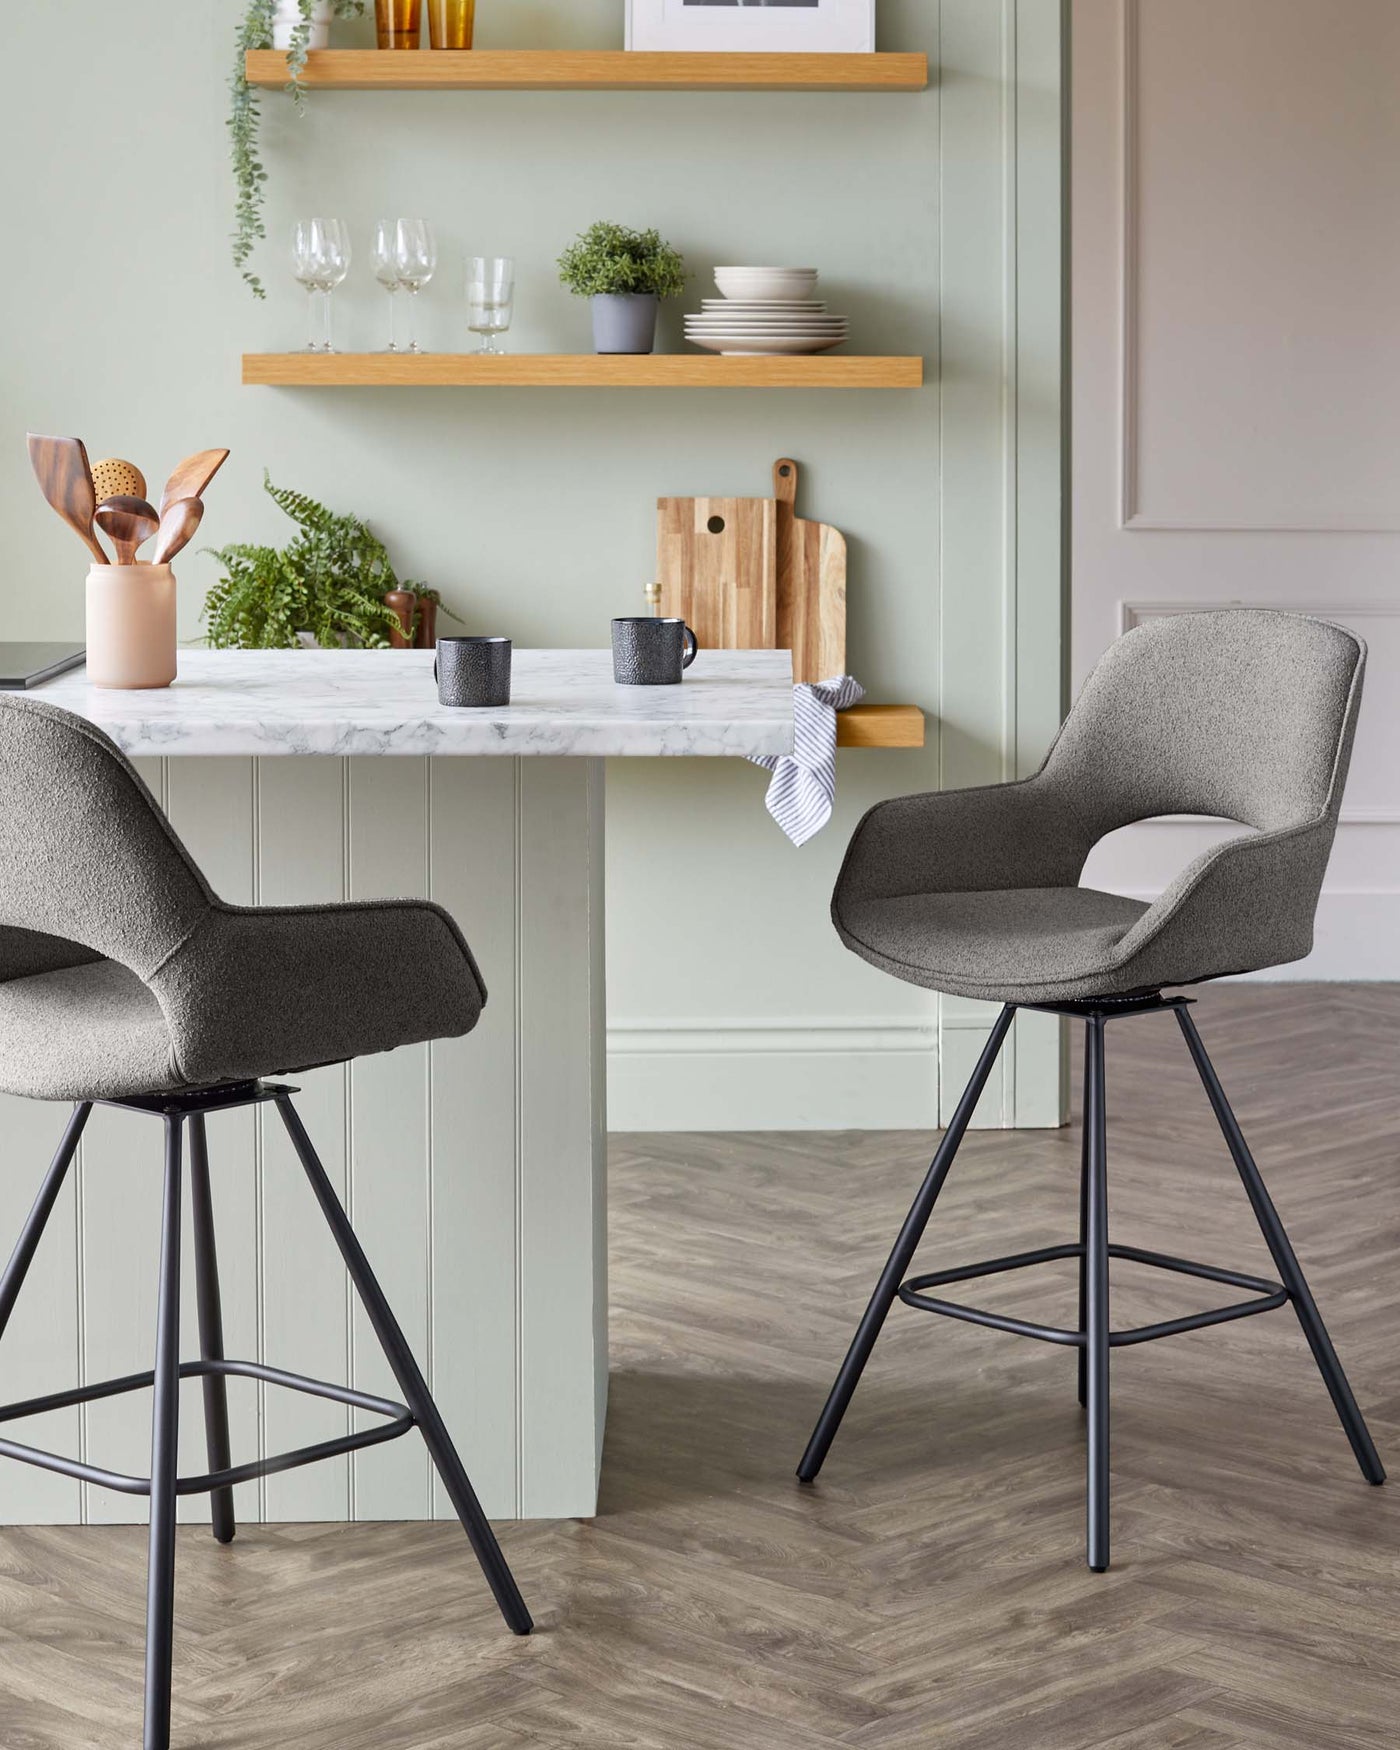 Two contemporary grey upholstered bar stools with black metal legs and a breakfast bar with a marble countertop and white panelled base.